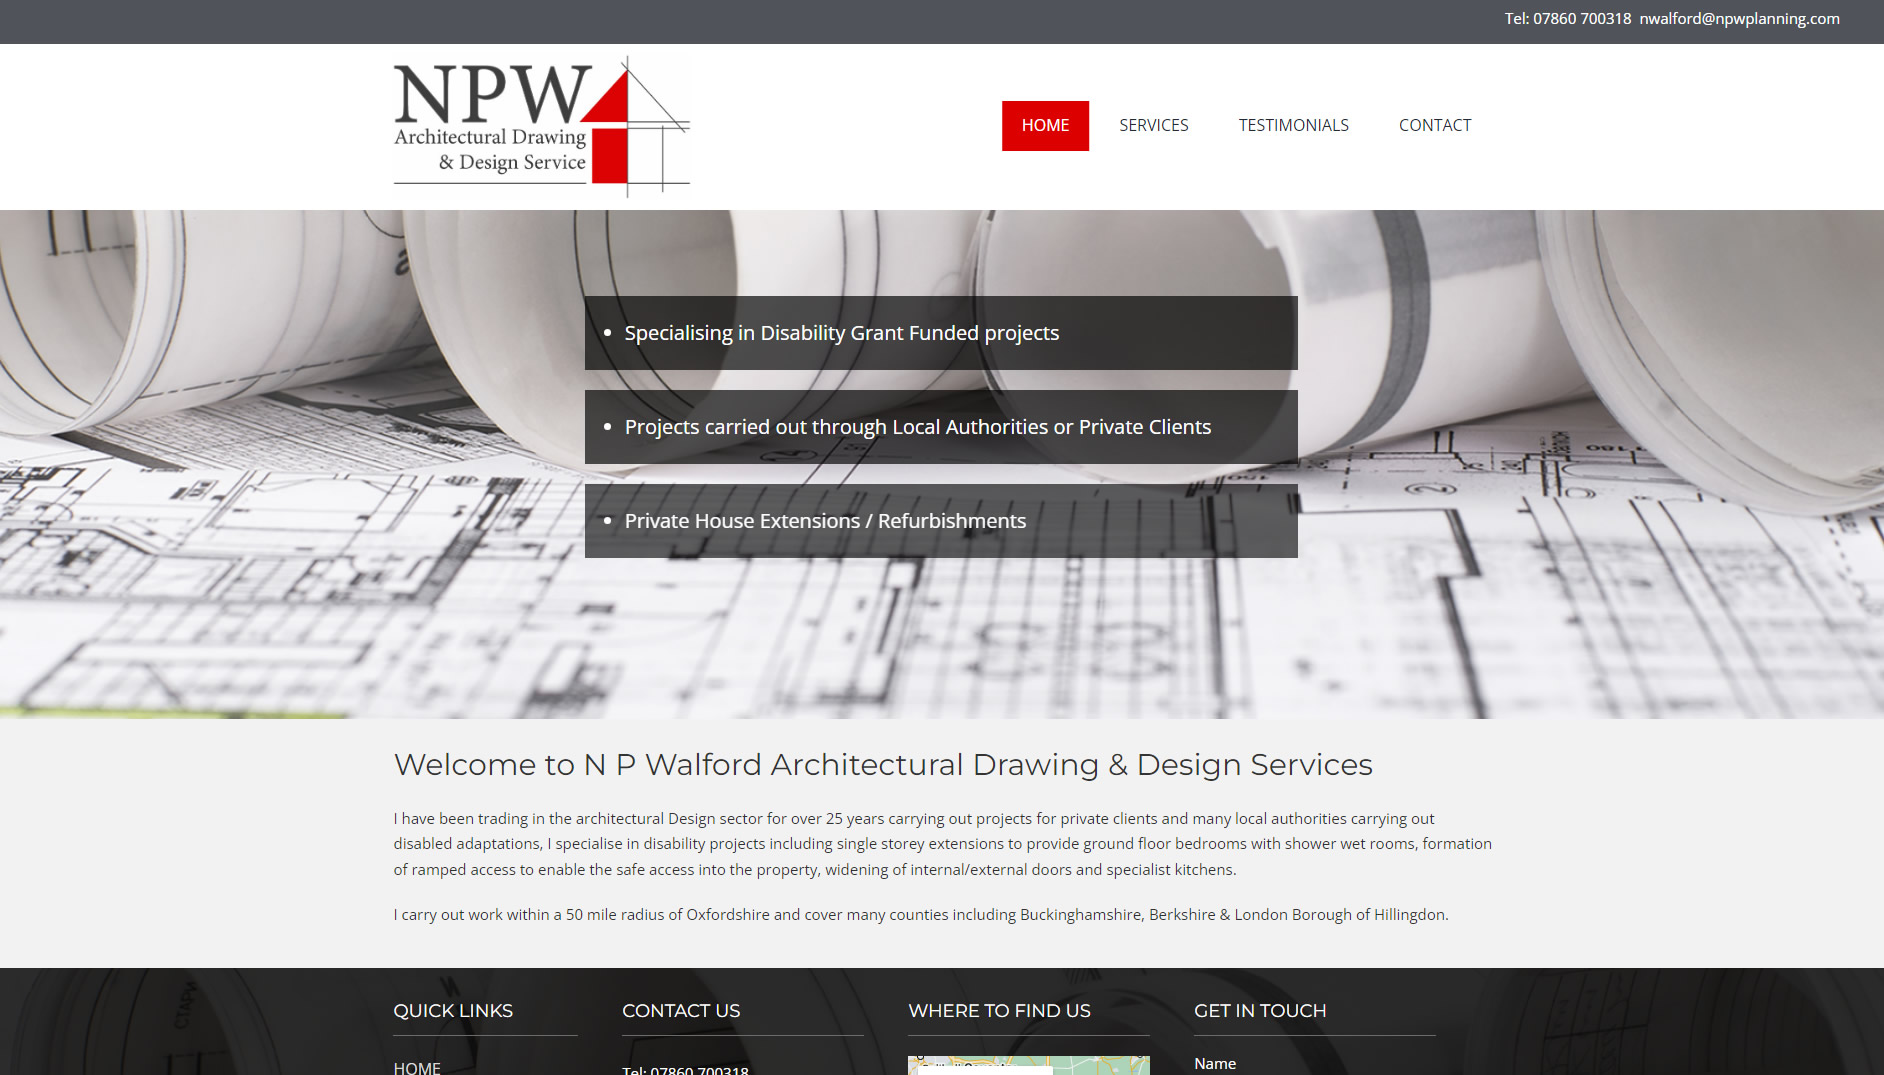 N P Walford Architectural Drawing & Design Services